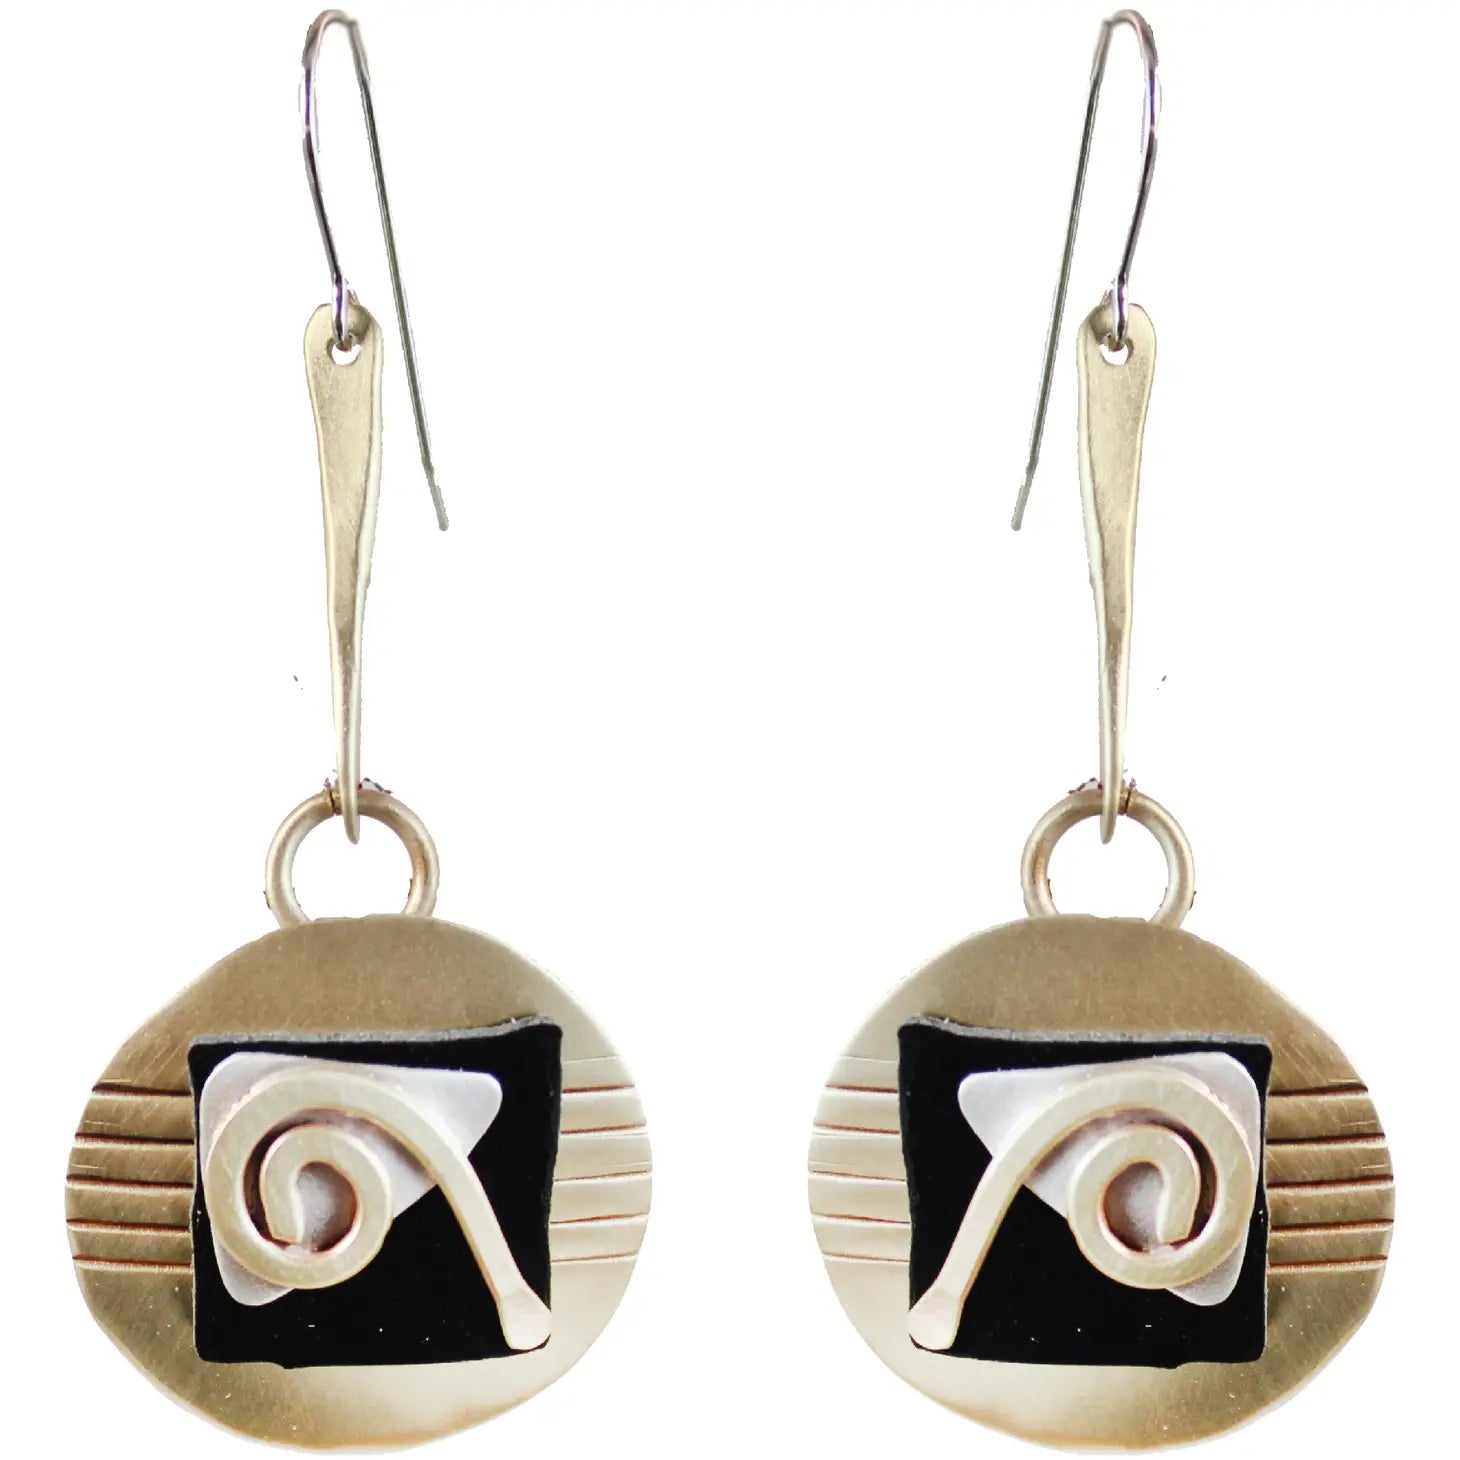 Whitney Designs E3859 Splash of Delight Earrings Sterling Silver Brass and Polymer Clay